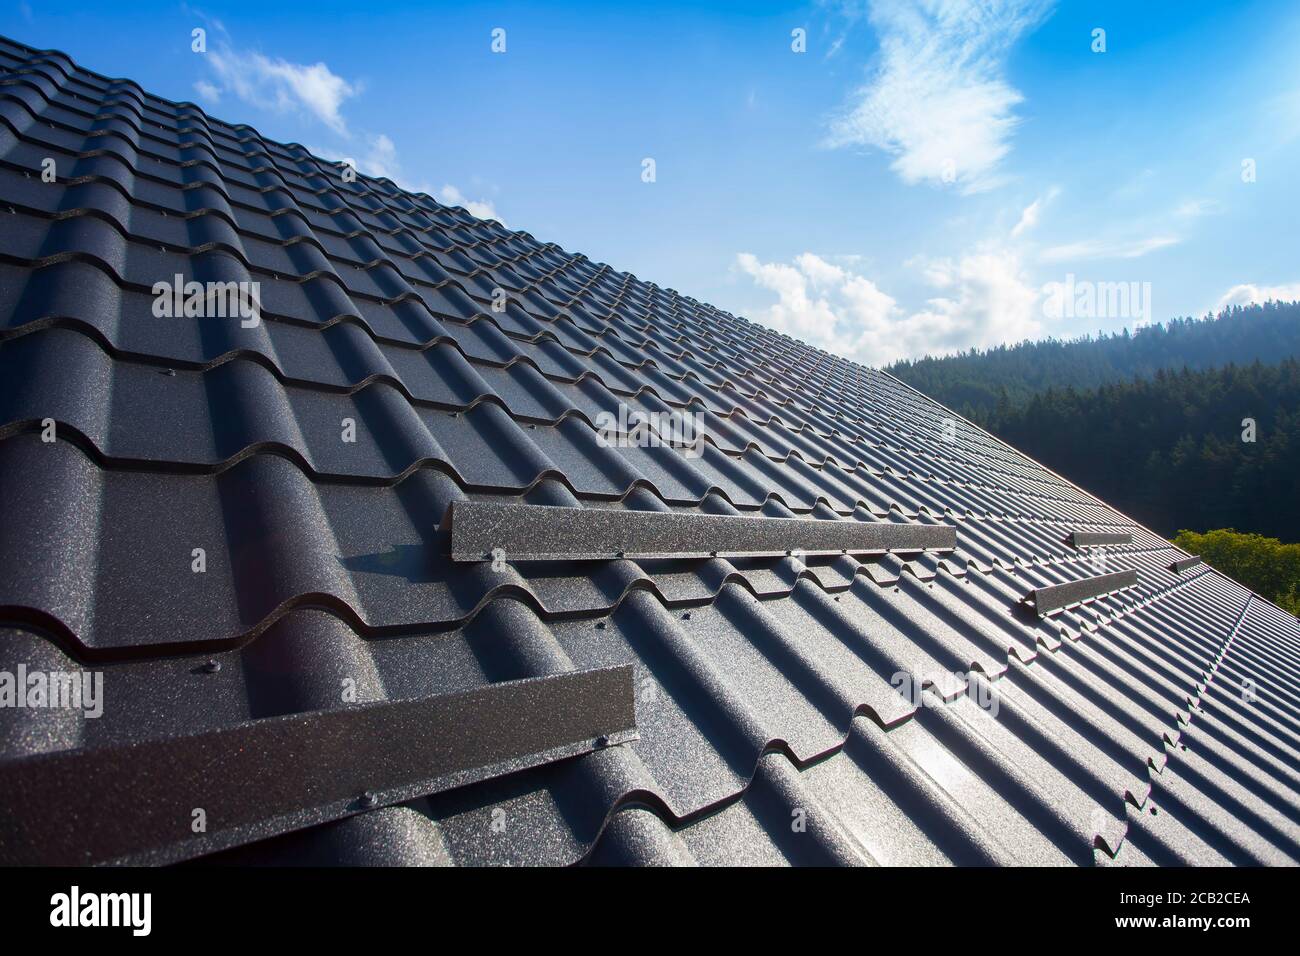 Roof repair, worker with white gloves replacing gray tiles or shingles on  house with blue sky